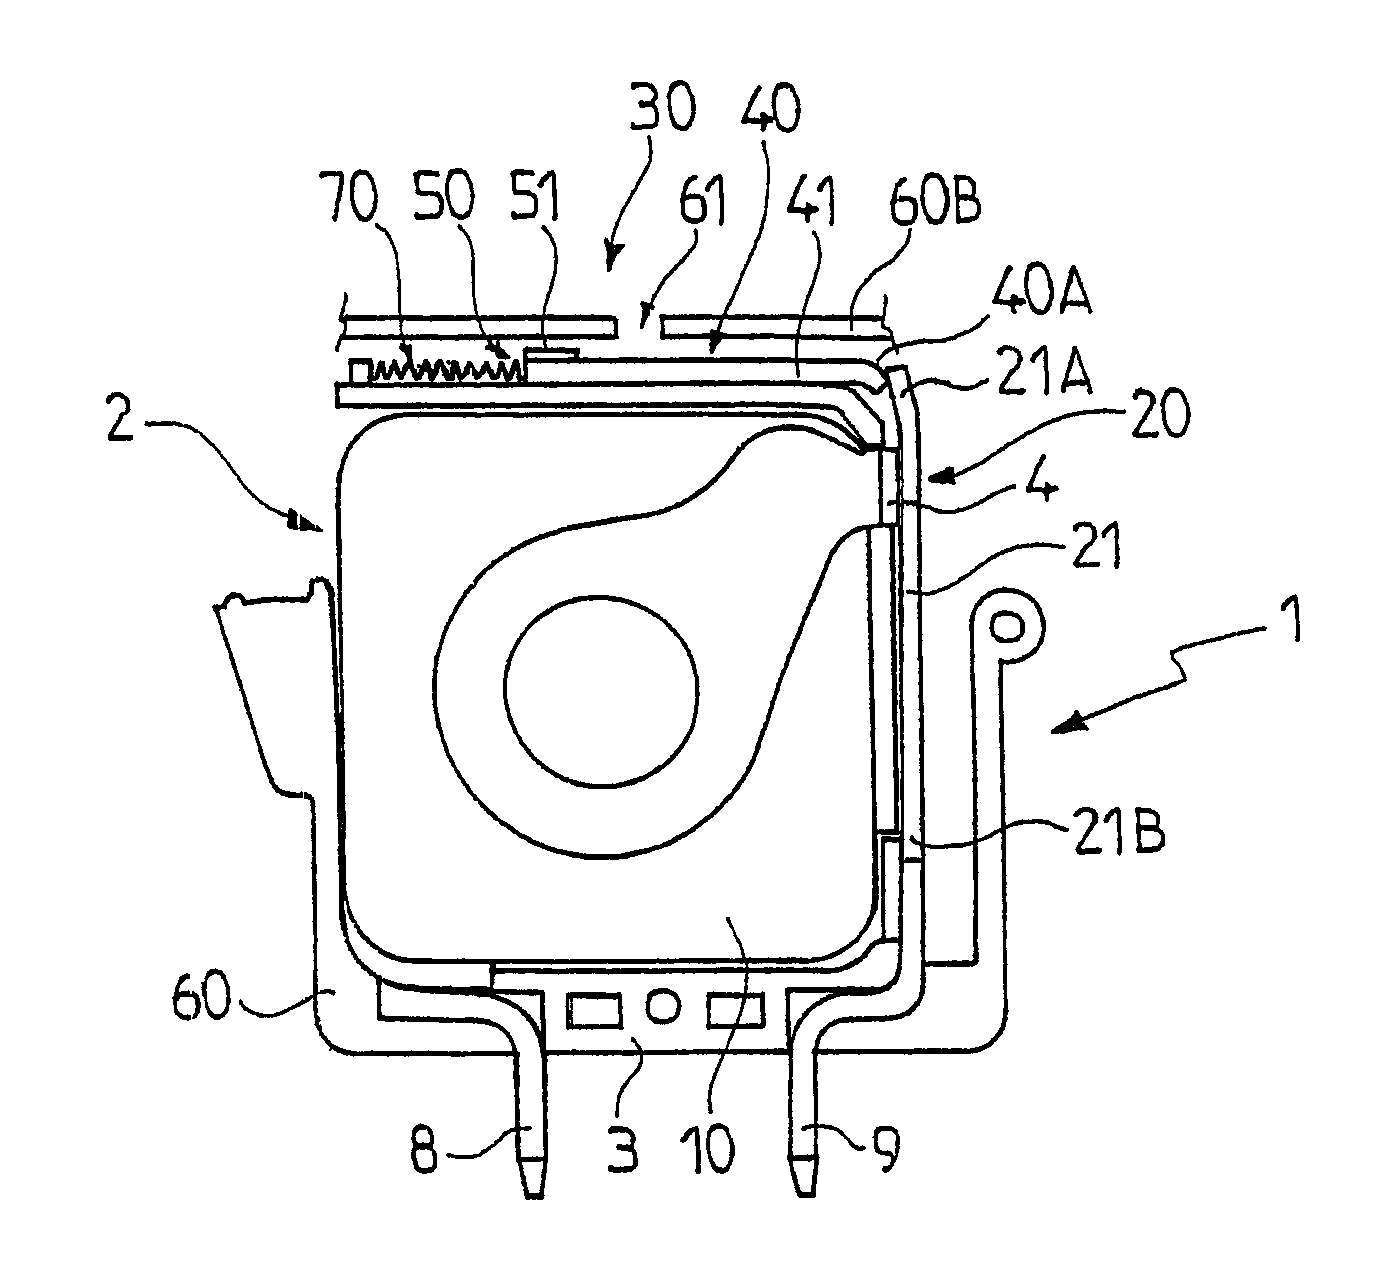 Surge voltage protection device with improved disconnection and visual indication means